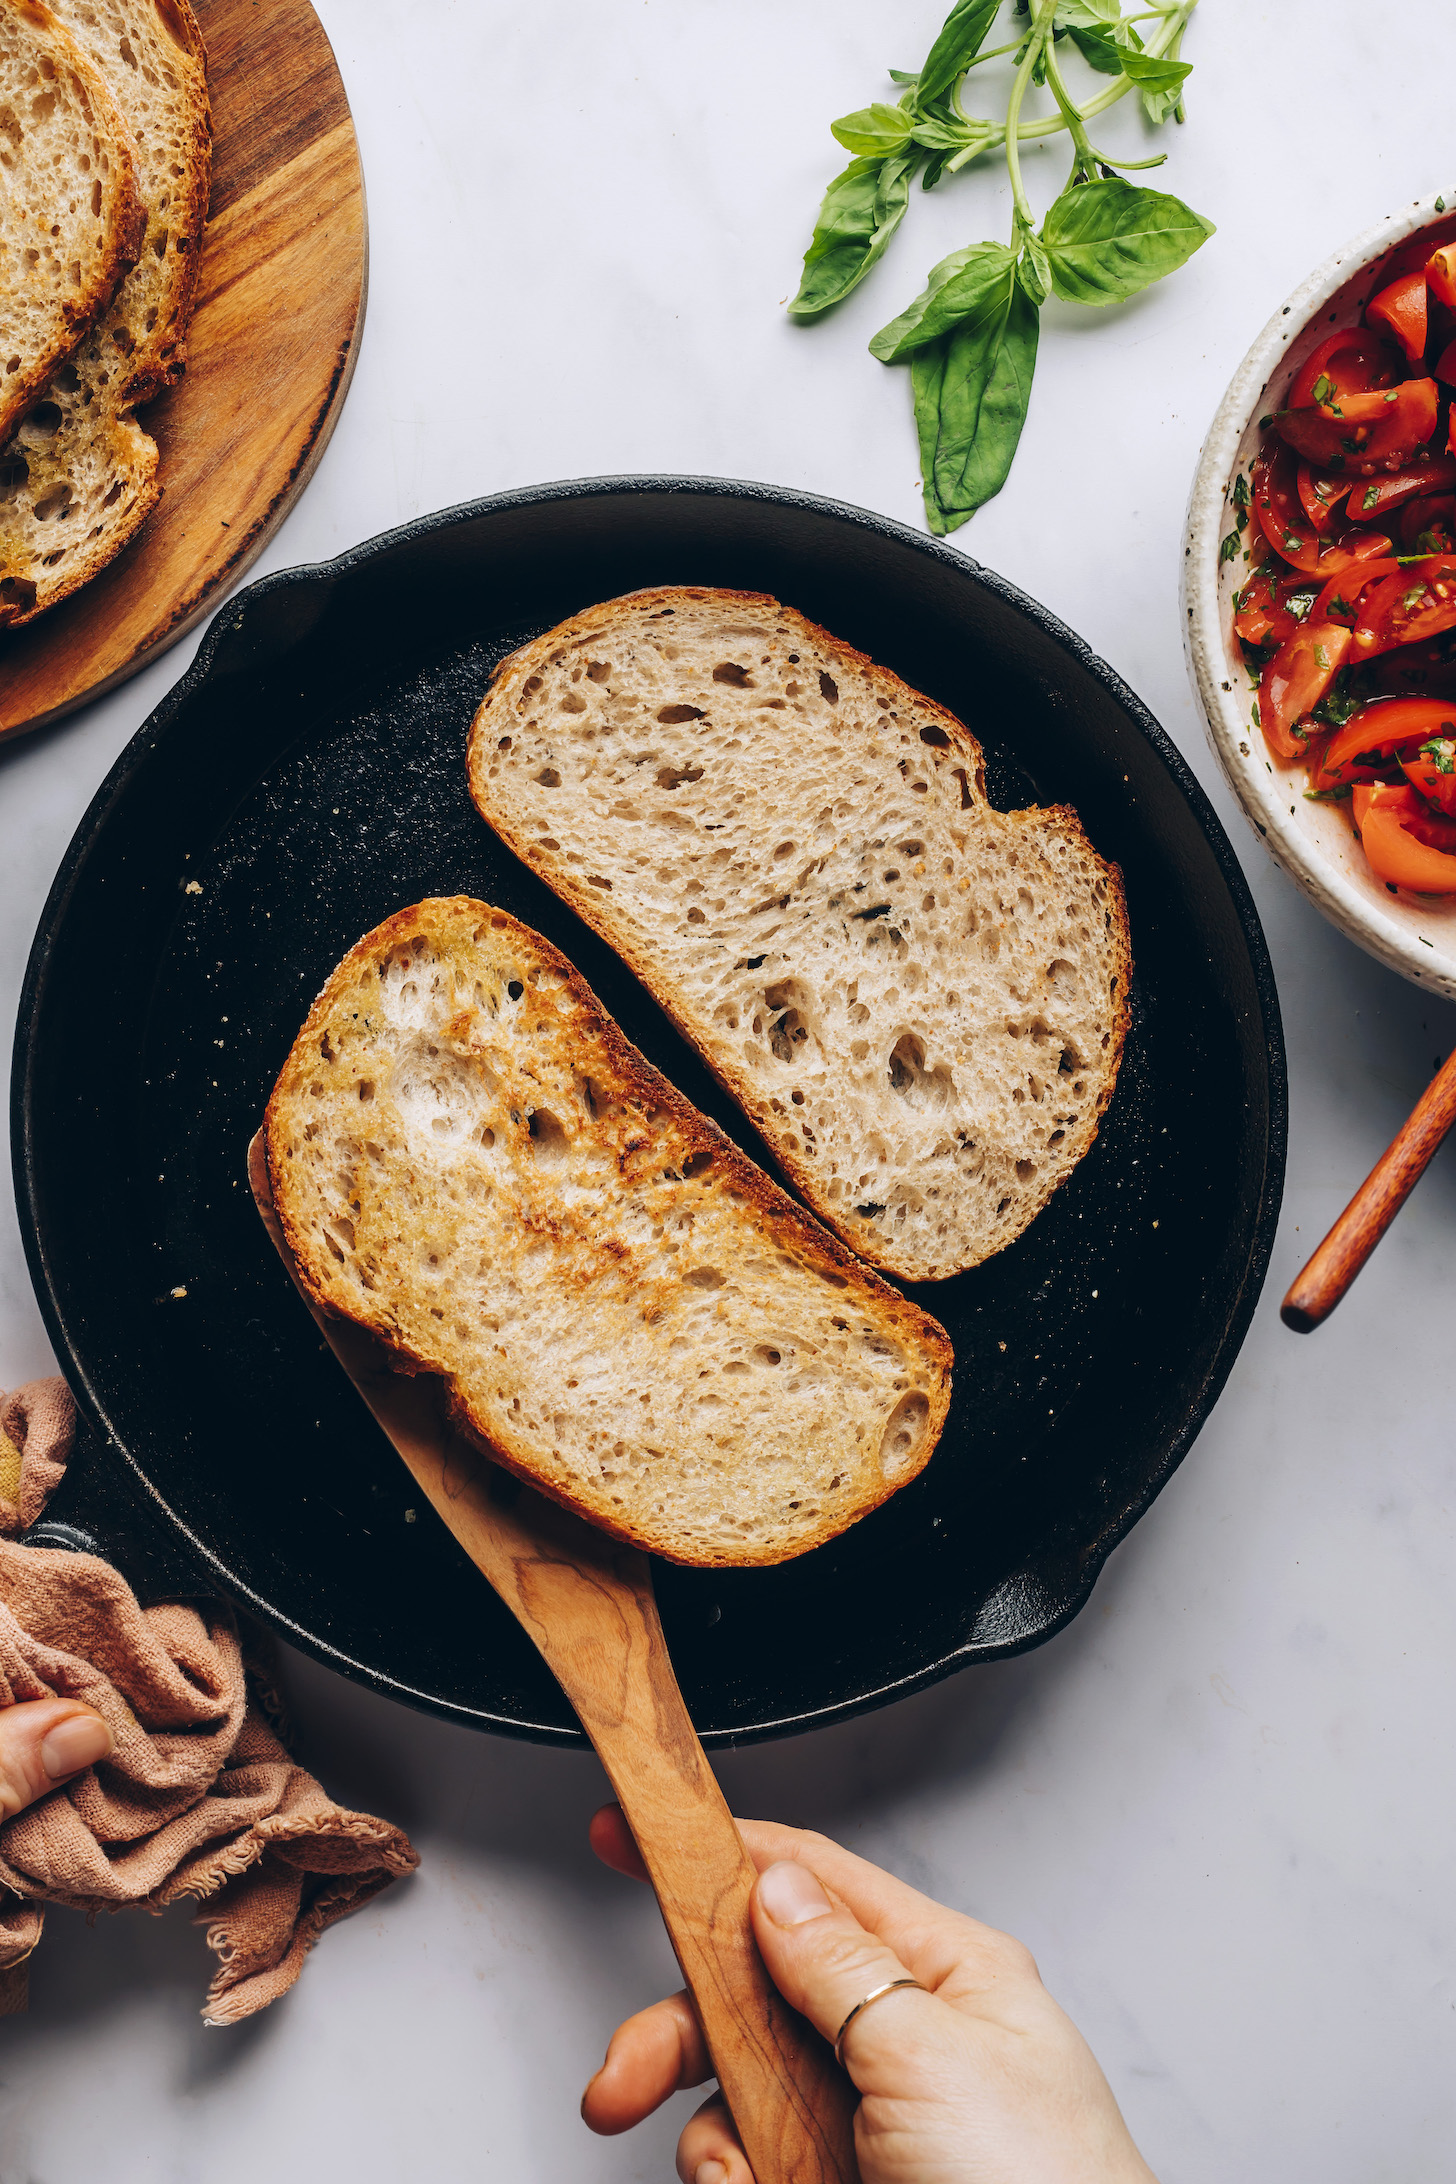 Toasting sourdough bread in a cast iron skillet